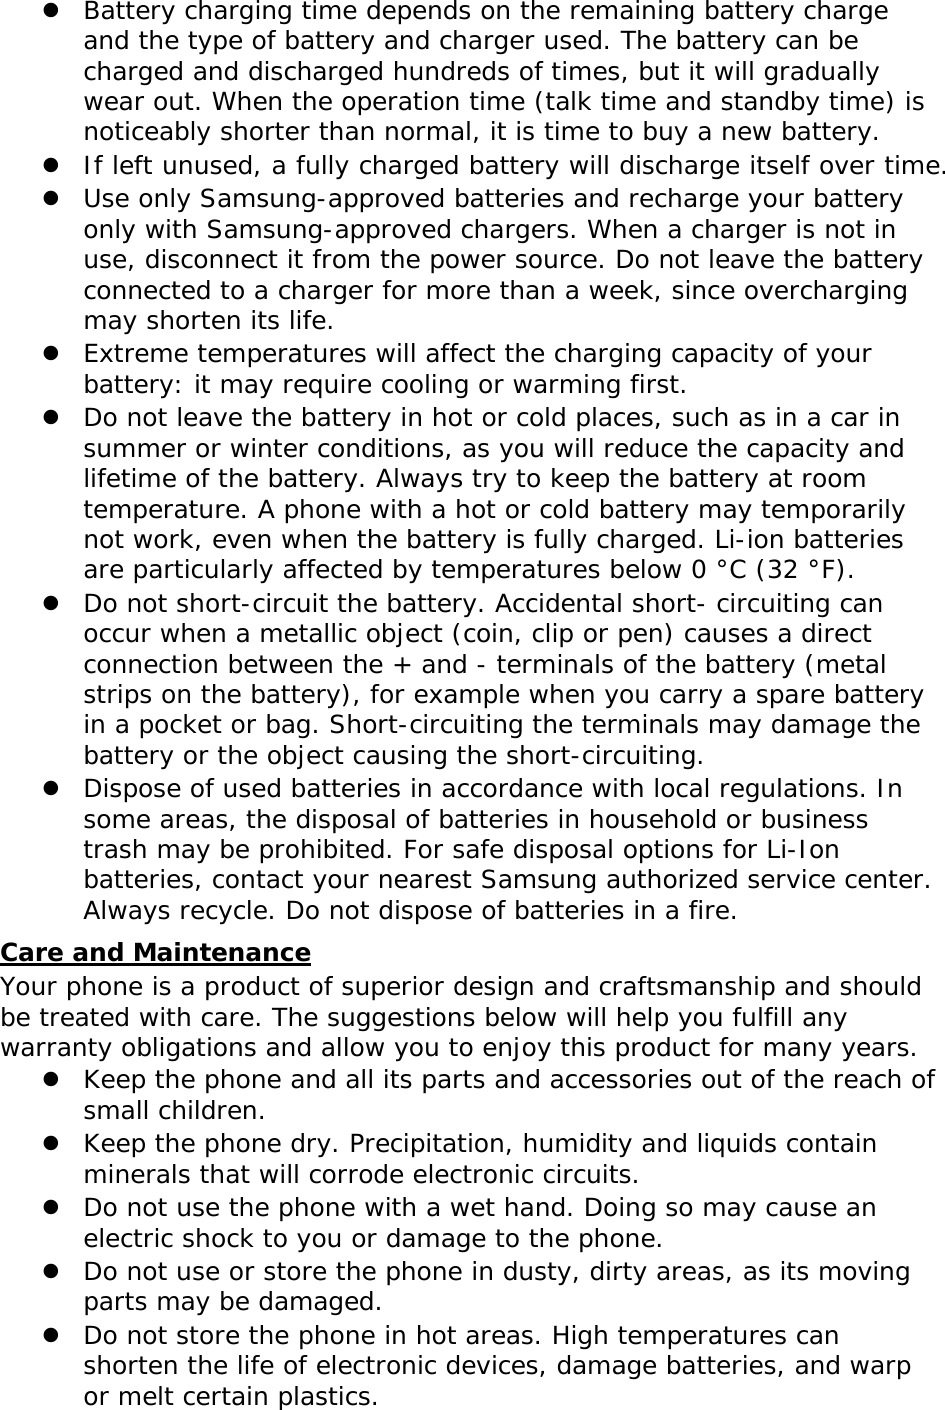  Battery charging time depends on the remaining battery charge and the type of battery and charger used. The battery can be charged and discharged hundreds of times, but it will gradually wear out. When the operation time (talk time and standby time) is noticeably shorter than normal, it is time to buy a new battery.  If left unused, a fully charged battery will discharge itself over time.  Use only Samsung-approved batteries and recharge your battery only with Samsung-approved chargers. When a charger is not in use, disconnect it from the power source. Do not leave the battery connected to a charger for more than a week, since overcharging may shorten its life.  Extreme temperatures will affect the charging capacity of your battery: it may require cooling or warming first.  Do not leave the battery in hot or cold places, such as in a car in summer or winter conditions, as you will reduce the capacity and lifetime of the battery. Always try to keep the battery at room temperature. A phone with a hot or cold battery may temporarily not work, even when the battery is fully charged. Li-ion batteries are particularly affected by temperatures below 0 °C (32 °F).  Do not short-circuit the battery. Accidental short- circuiting can occur when a metallic object (coin, clip or pen) causes a direct connection between the + and - terminals of the battery (metal strips on the battery), for example when you carry a spare battery in a pocket or bag. Short-circuiting the terminals may damage the battery or the object causing the short-circuiting.  Dispose of used batteries in accordance with local regulations. In some areas, the disposal of batteries in household or business trash may be prohibited. For safe disposal options for Li-Ion batteries, contact your nearest Samsung authorized service center. Always recycle. Do not dispose of batteries in a fire. Care and Maintenance Your phone is a product of superior design and craftsmanship and should be treated with care. The suggestions below will help you fulfill any warranty obligations and allow you to enjoy this product for many years.  Keep the phone and all its parts and accessories out of the reach of small children.  Keep the phone dry. Precipitation, humidity and liquids contain minerals that will corrode electronic circuits.  Do not use the phone with a wet hand. Doing so may cause an electric shock to you or damage to the phone.  Do not use or store the phone in dusty, dirty areas, as its moving parts may be damaged.  Do not store the phone in hot areas. High temperatures can shorten the life of electronic devices, damage batteries, and warp or melt certain plastics. 